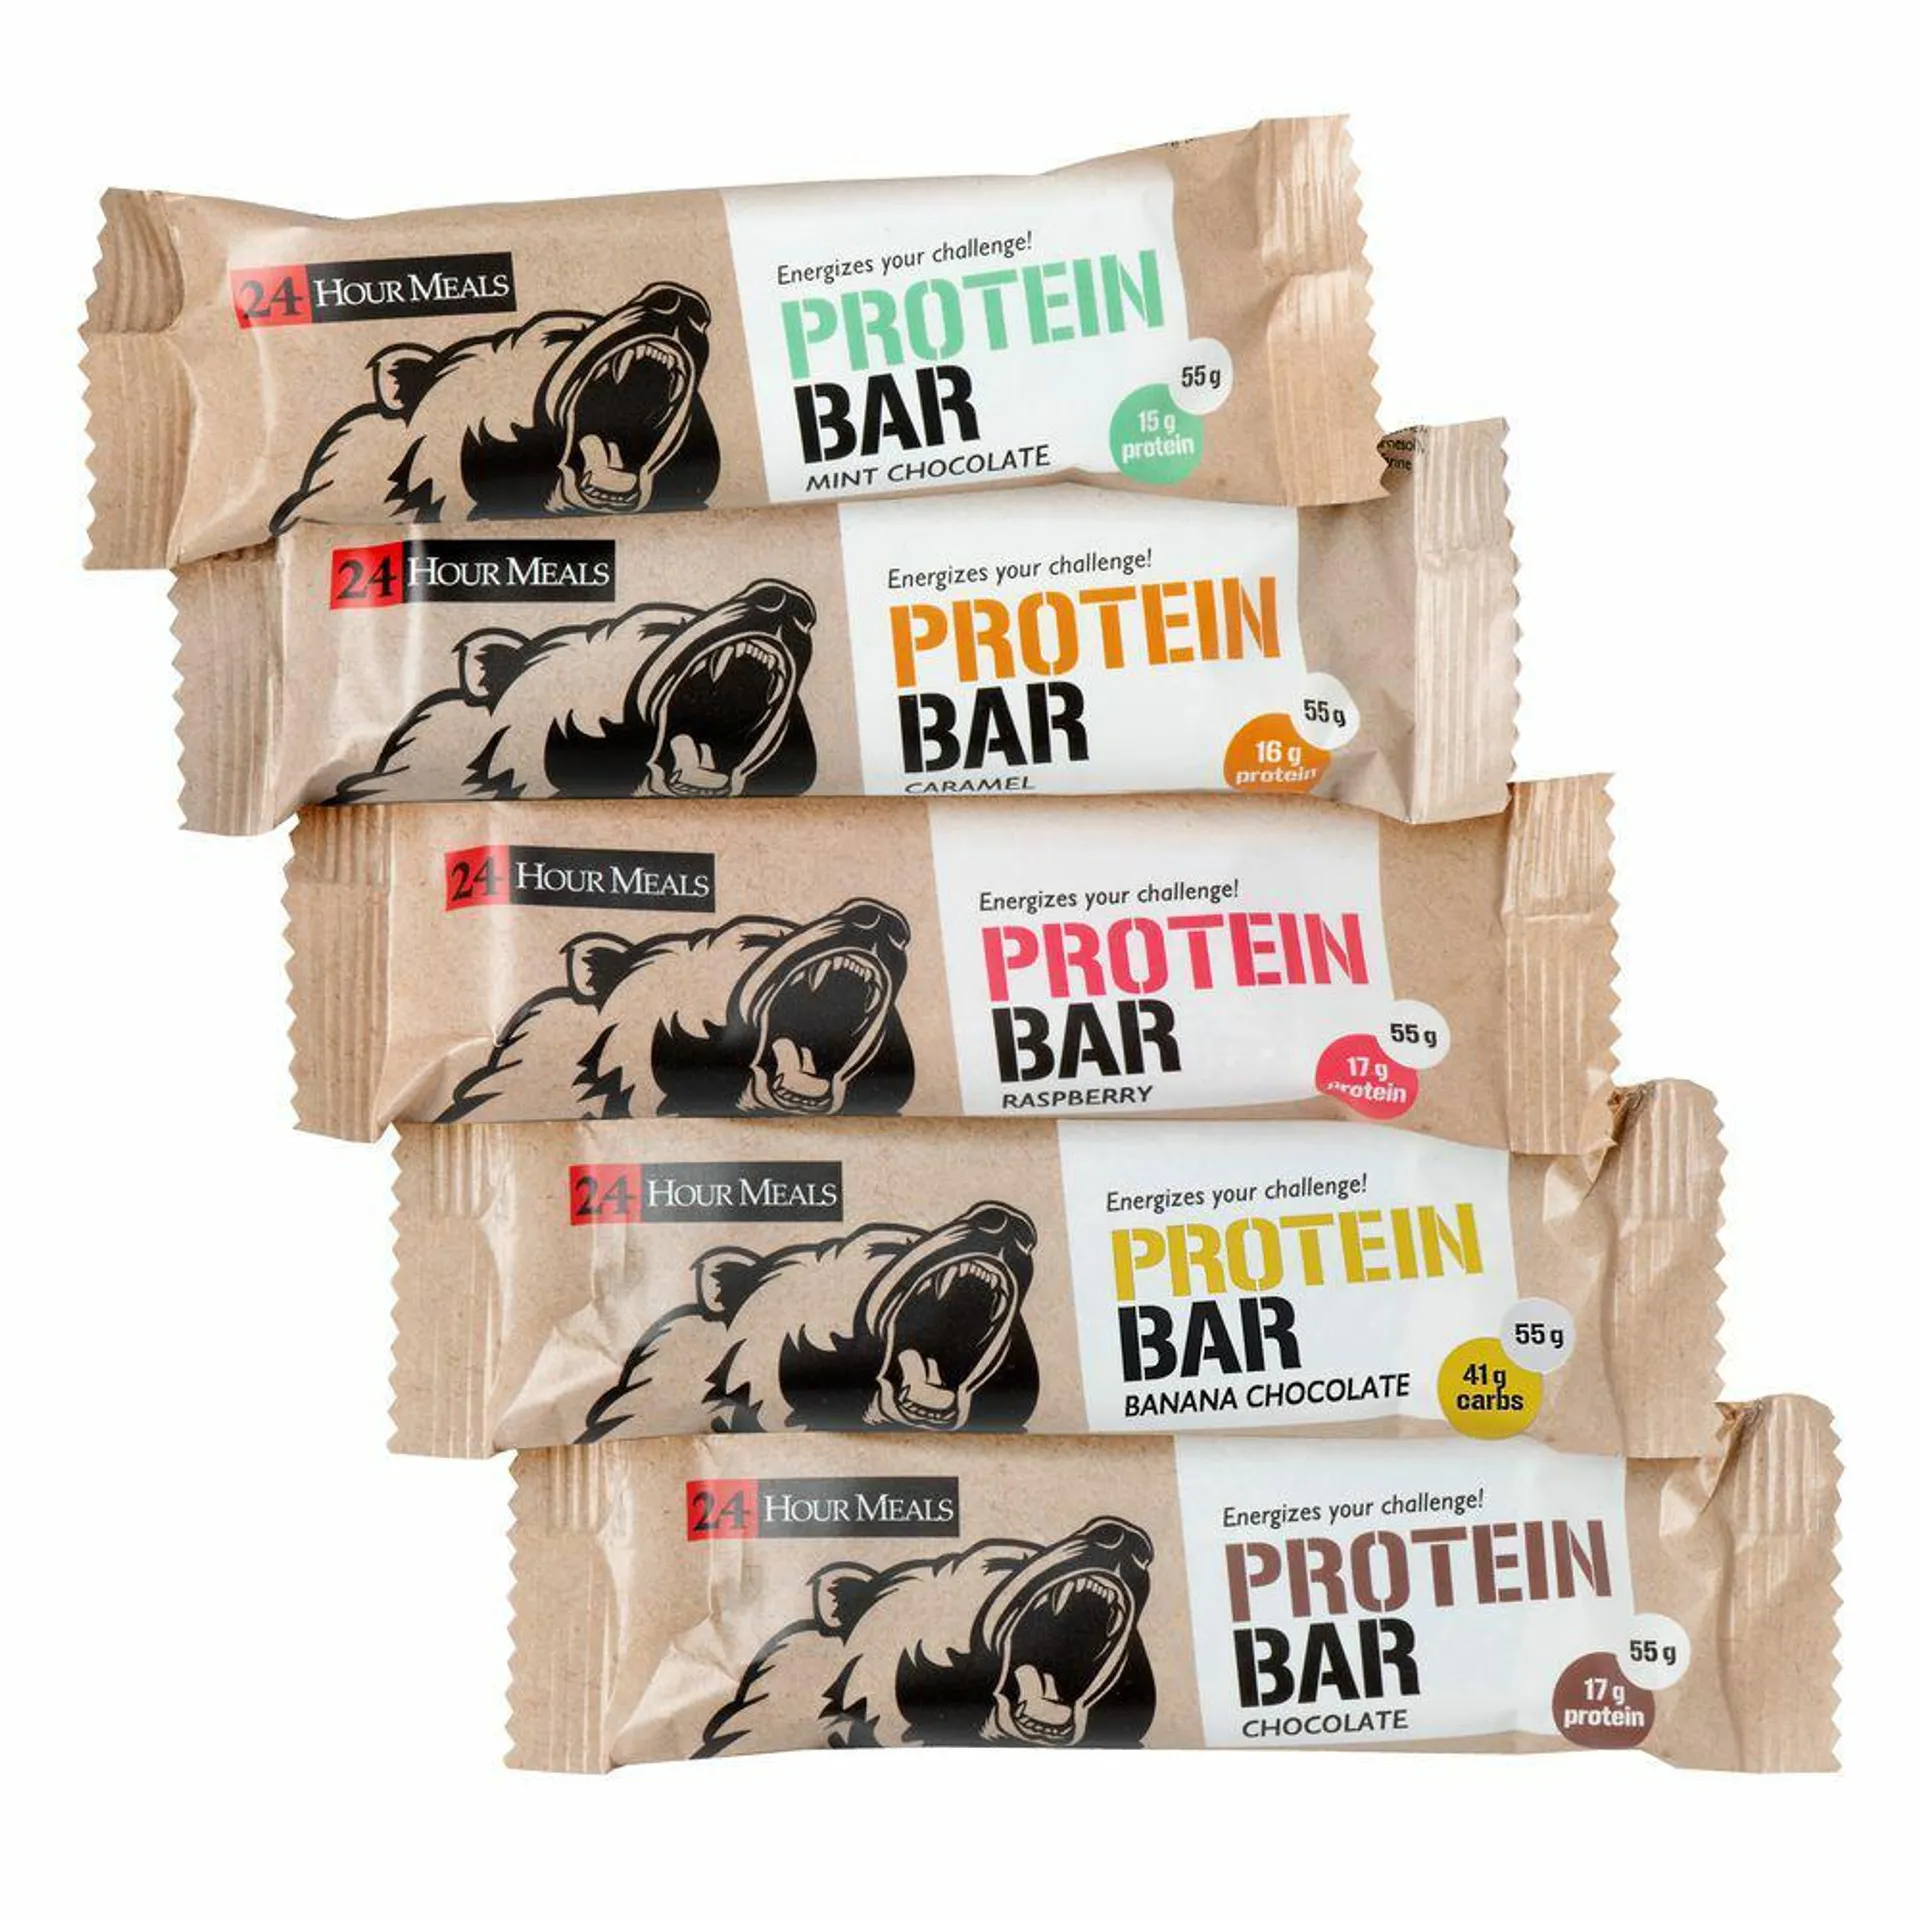 24 Hour Meals Protein bar